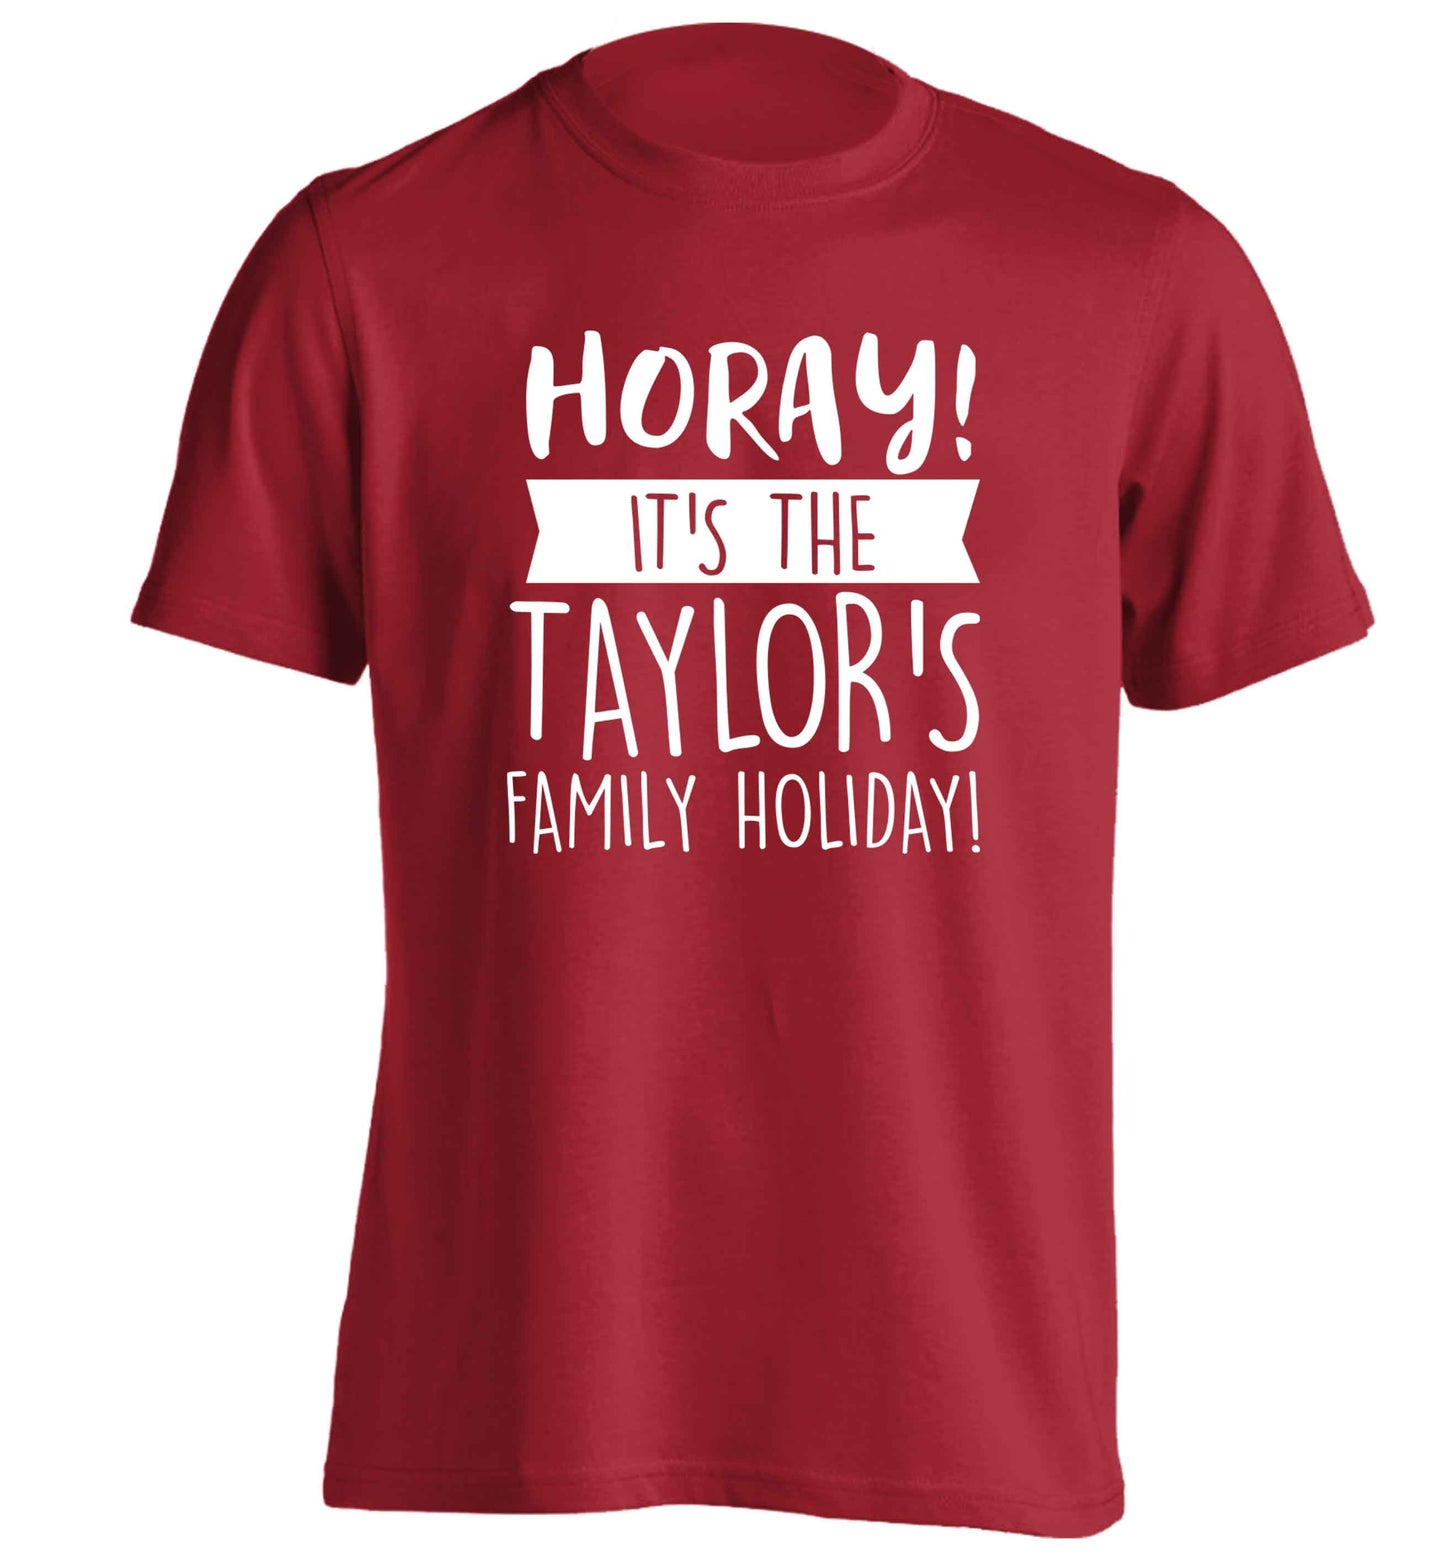 Horay it's the Taylor's family holiday! personalised item adults unisex red Tshirt 2XL